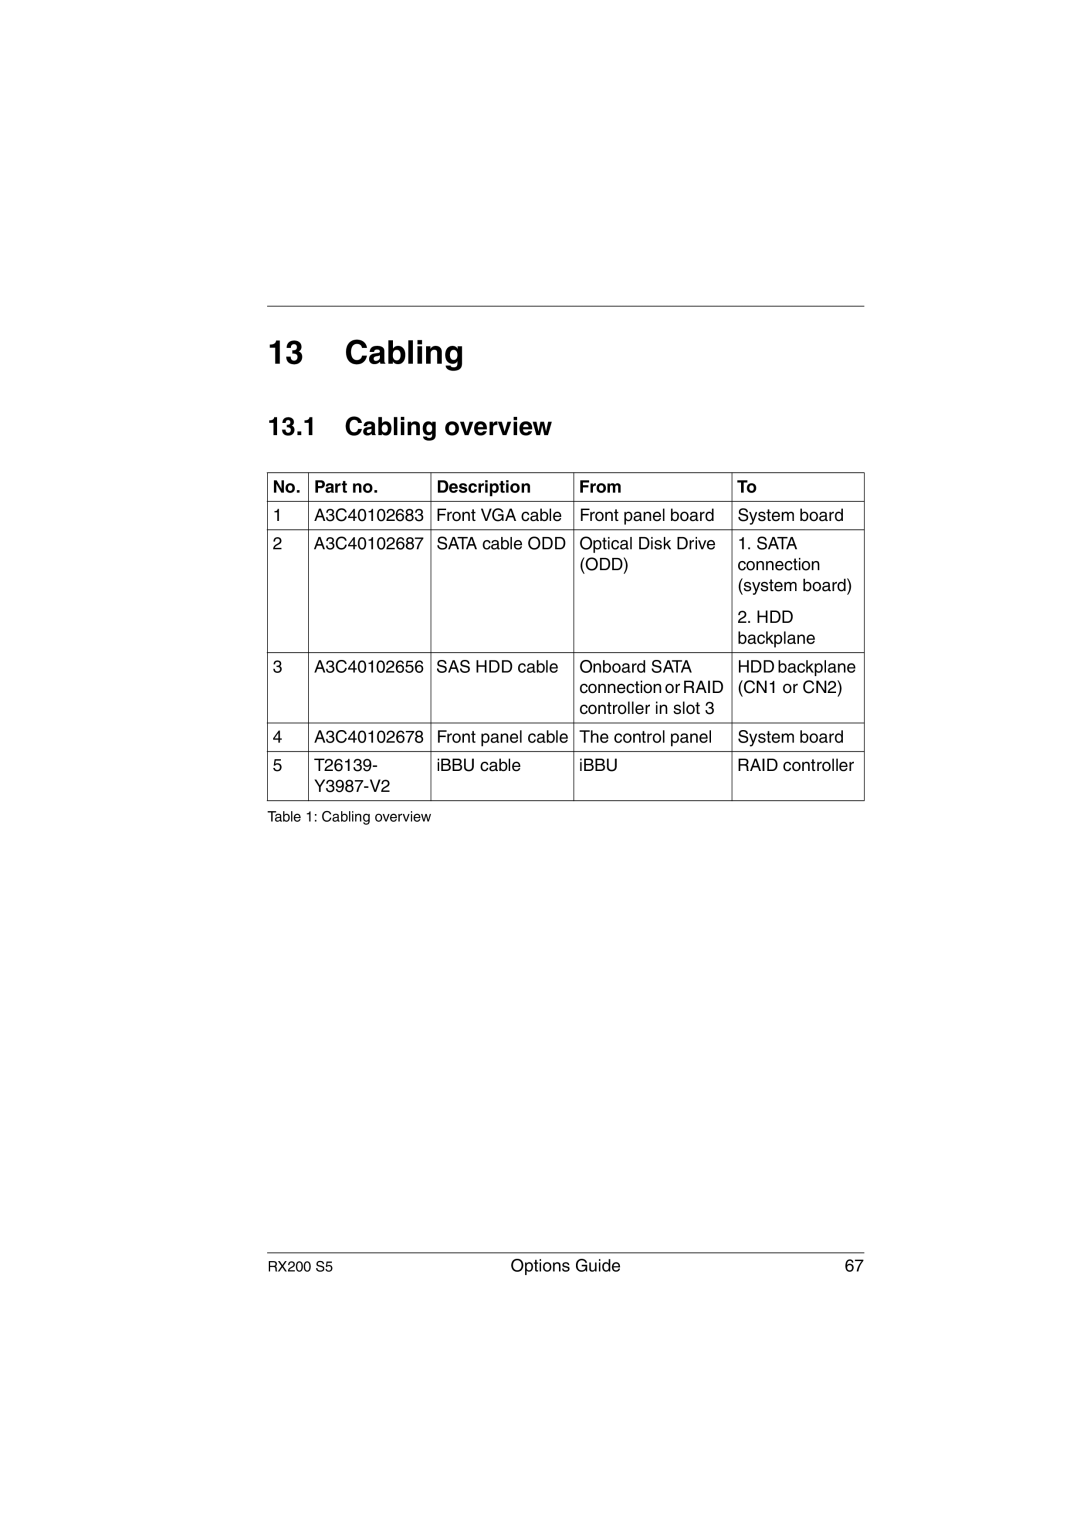 Fujitsu RX200 S5 manual Cabling overview, Description From 